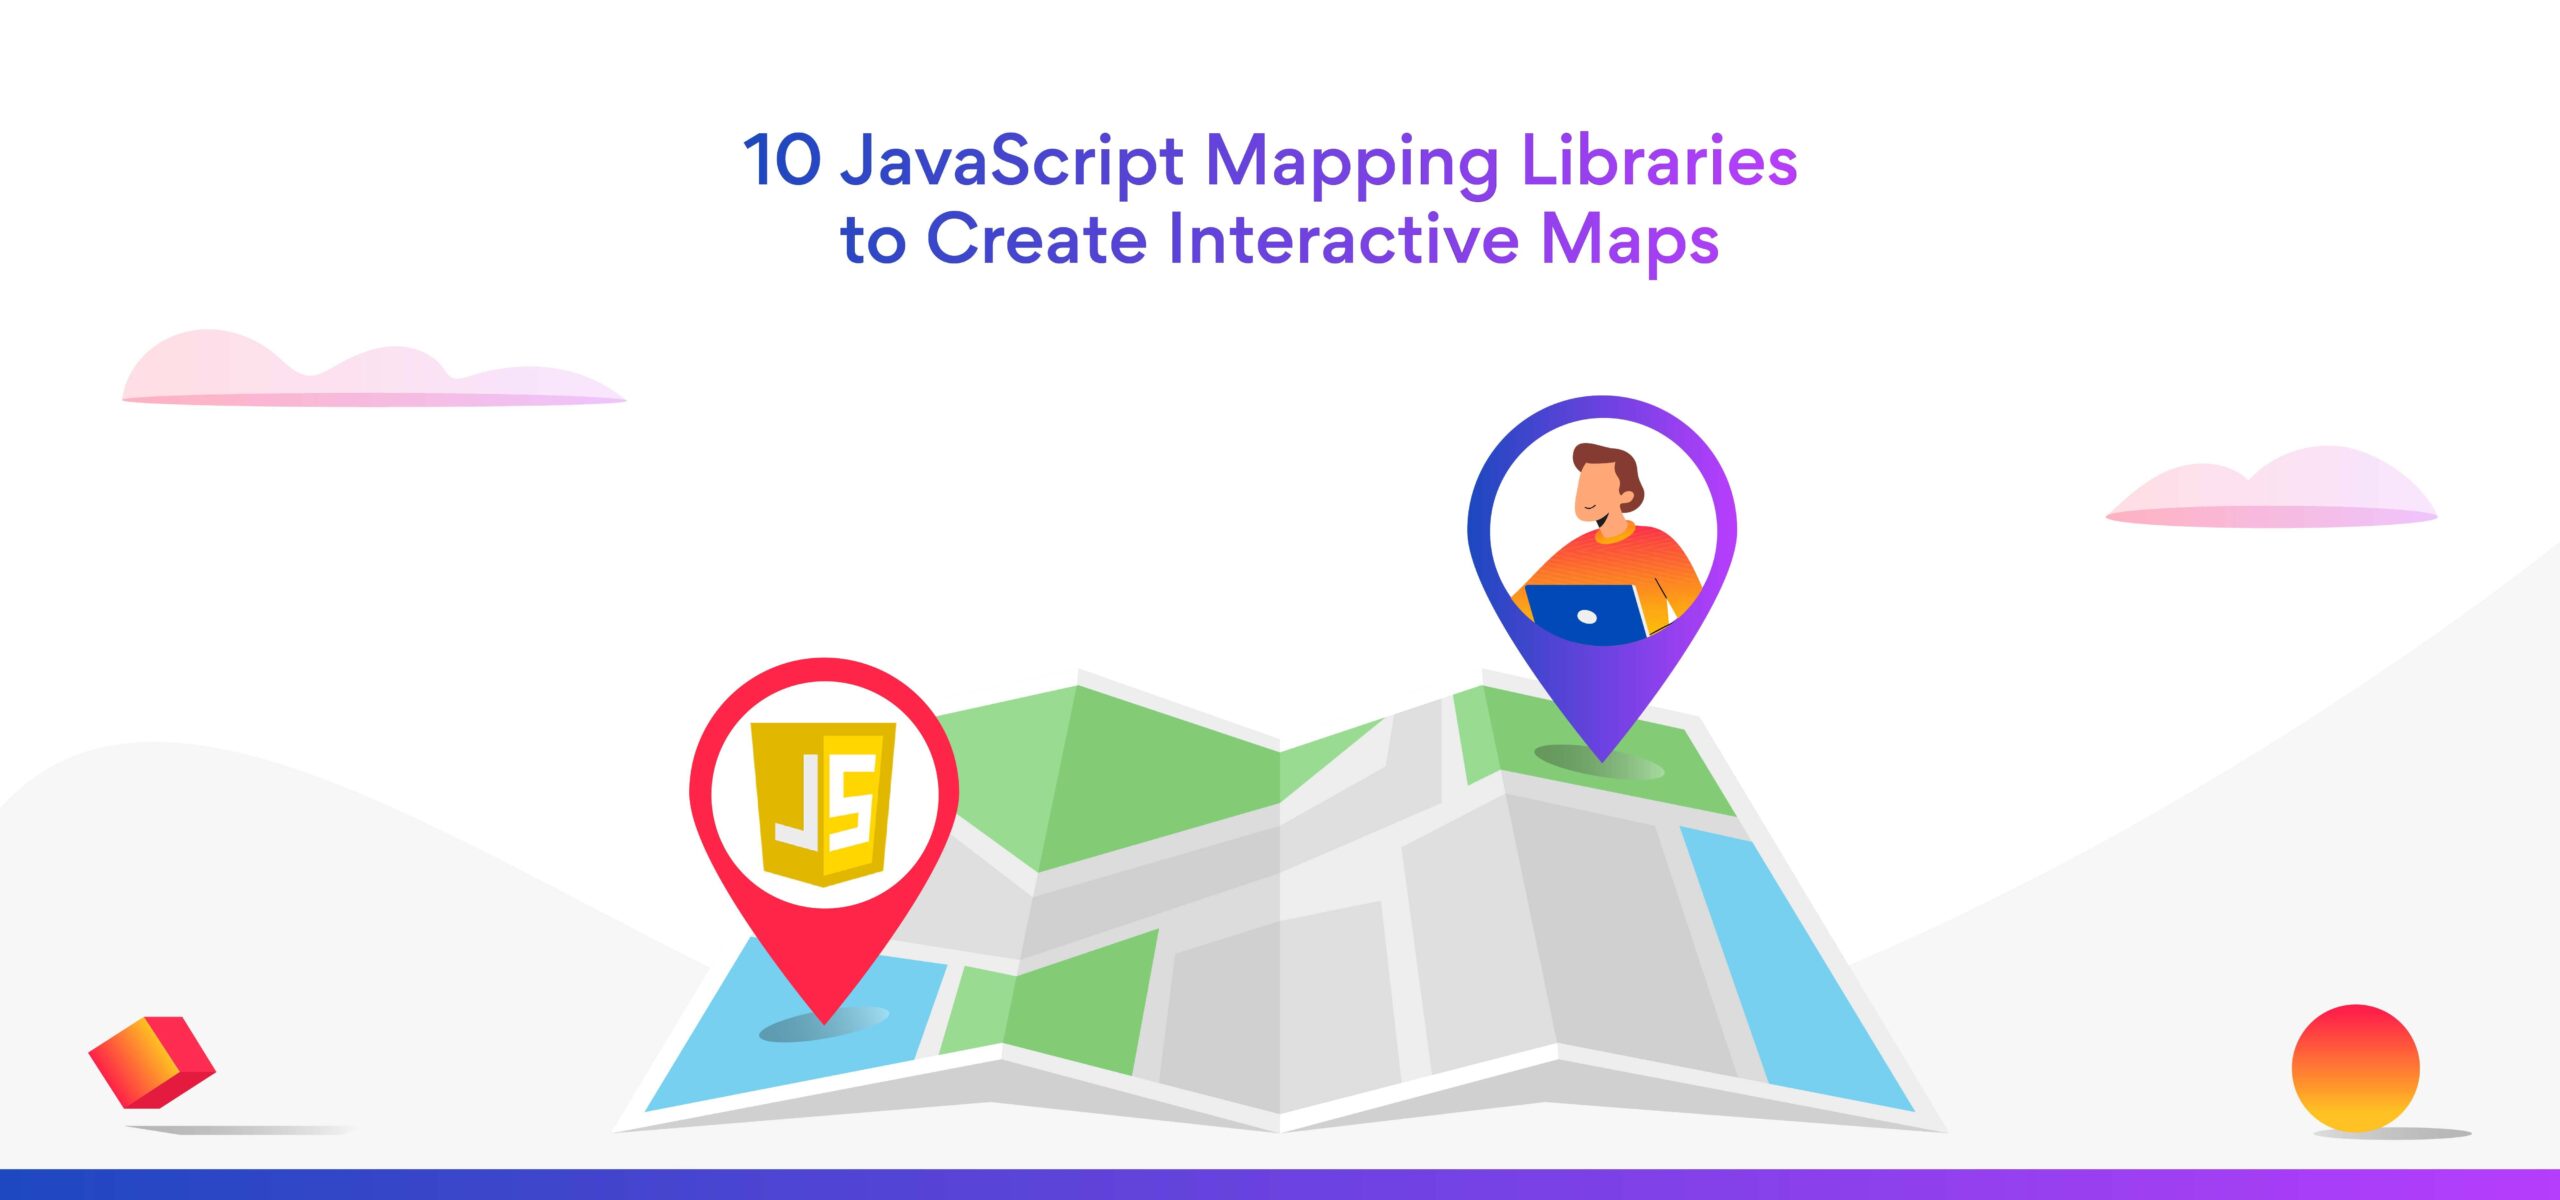 10 JavaScript Mapping Libraries